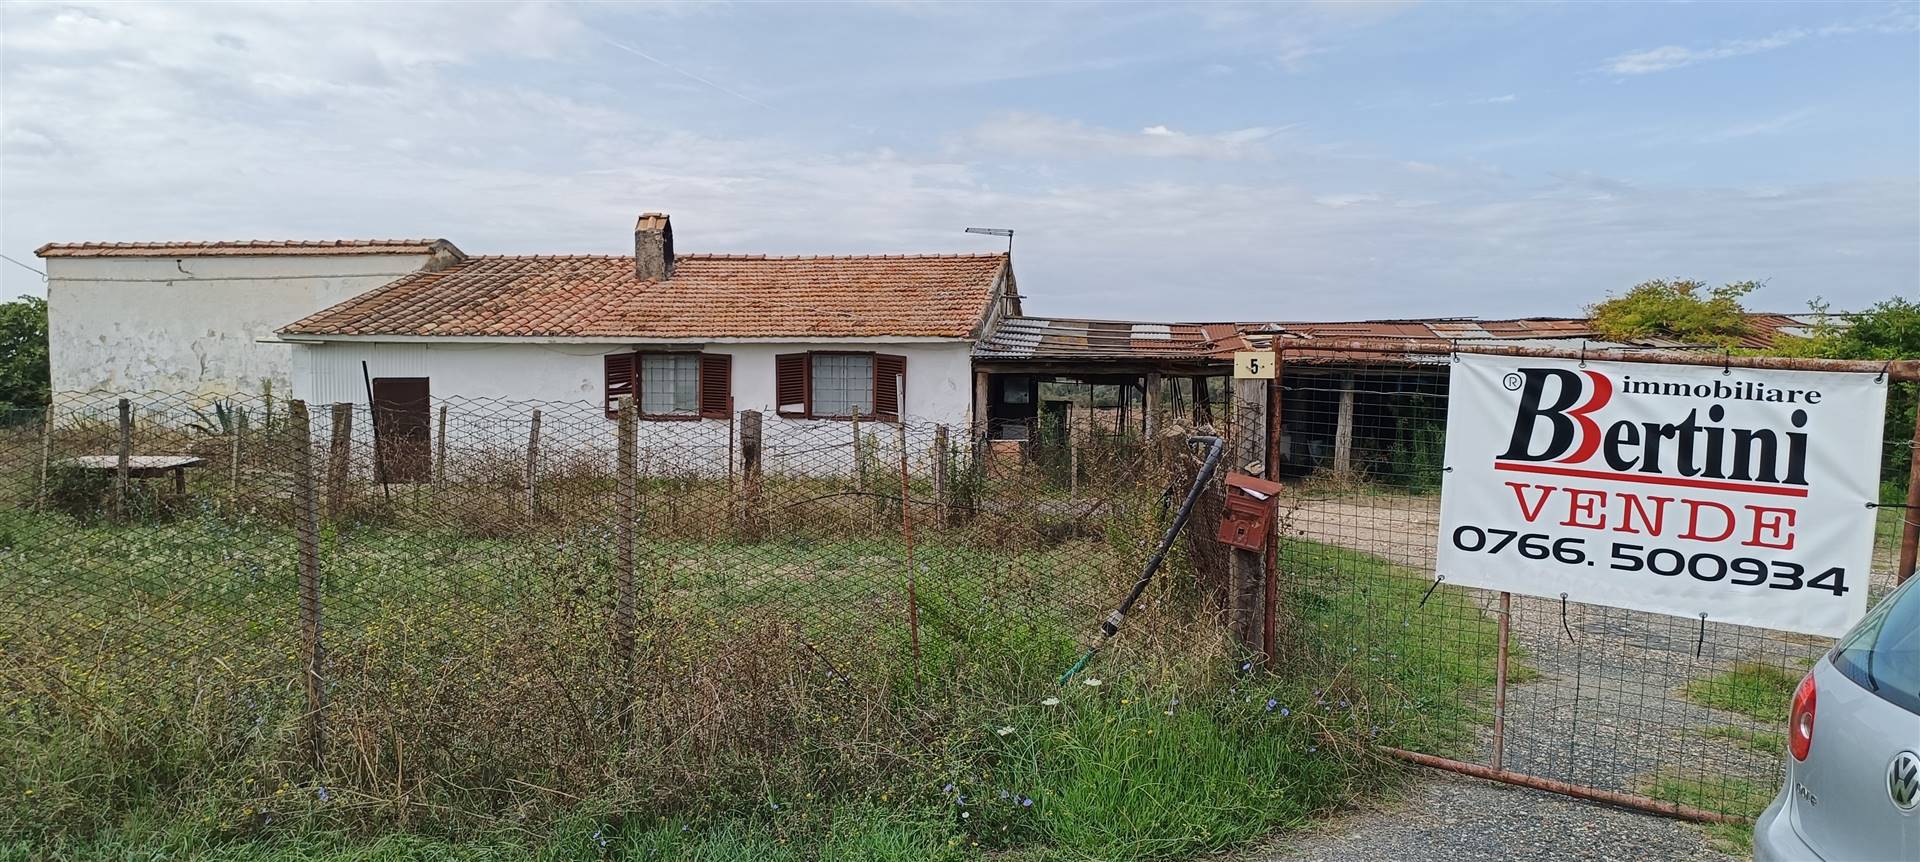 Looking for a great investment opportunity? Look no further than this incredible property in Cerveteri Zambra! With 5.6 hectares of land, a charming 